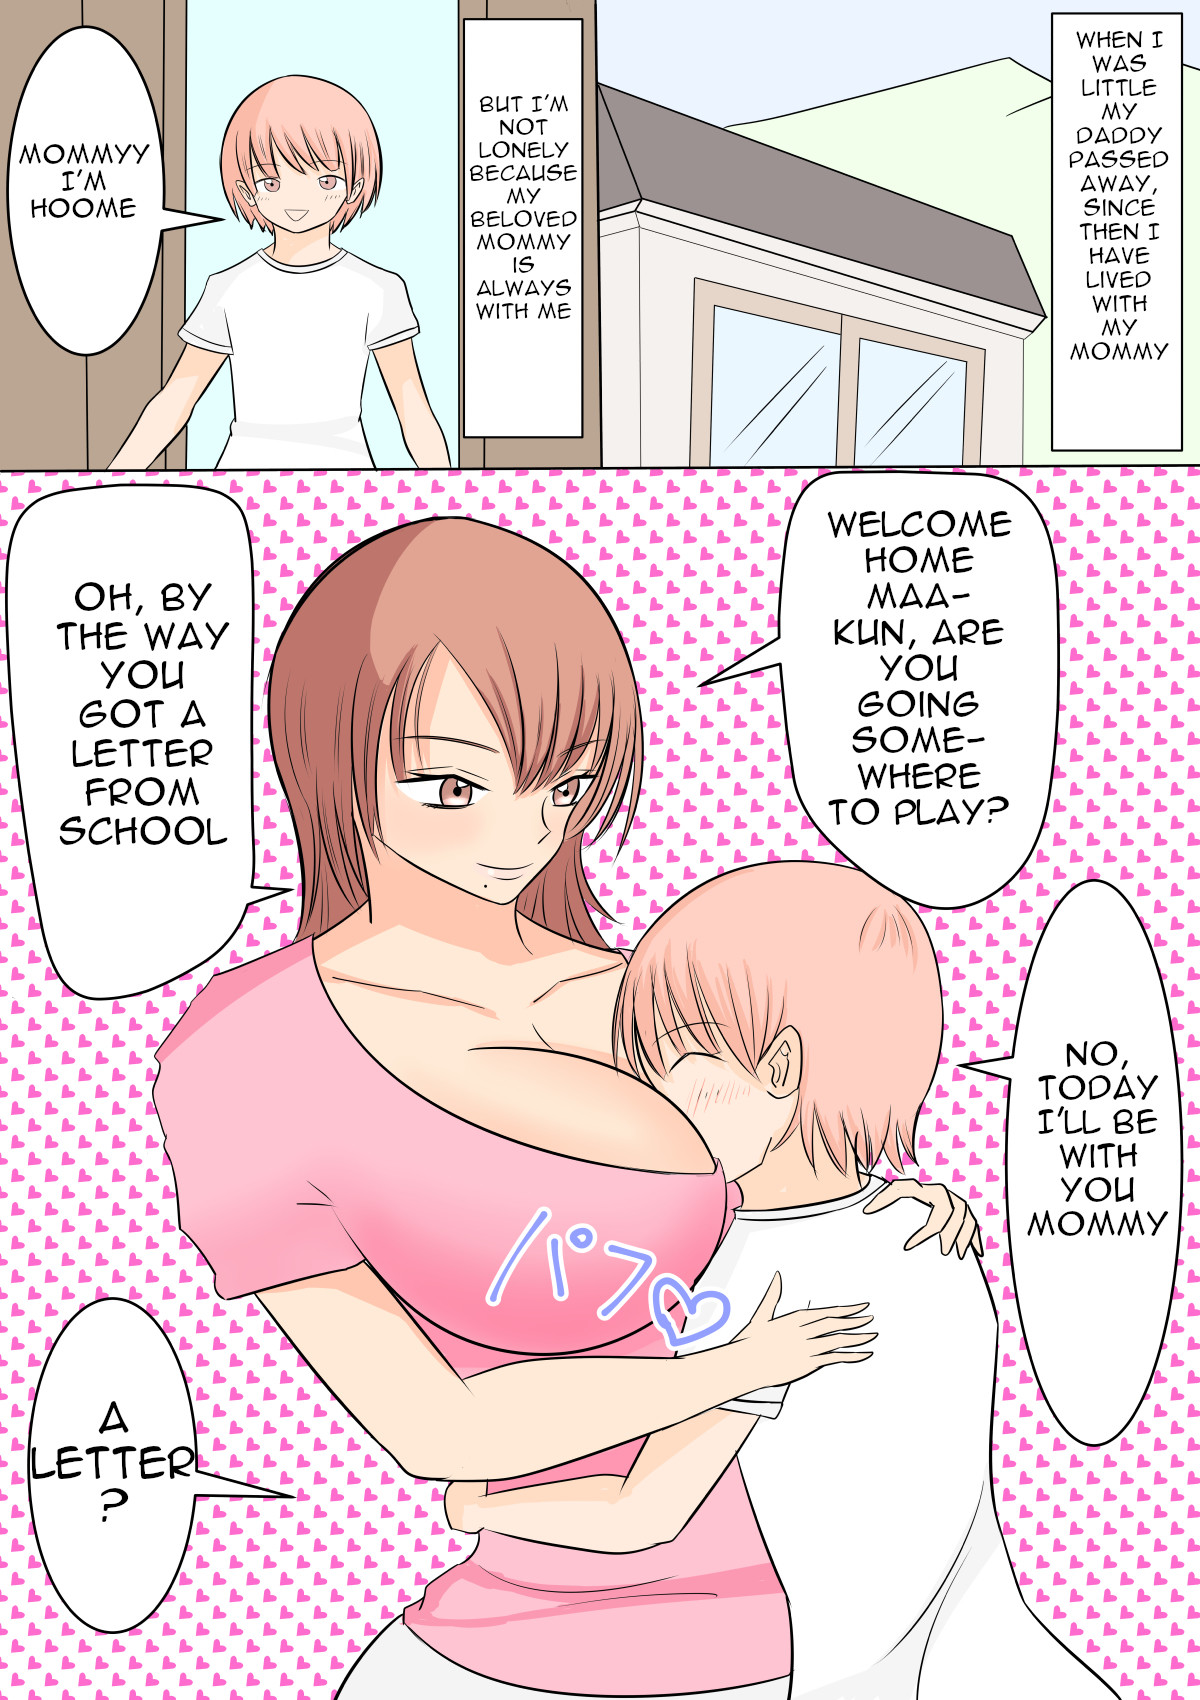 Hentai Manga Comic-Easygoing Lovey-Dovey Sex Education With My Beloved Soft and Fluffy Mommy-Read-2